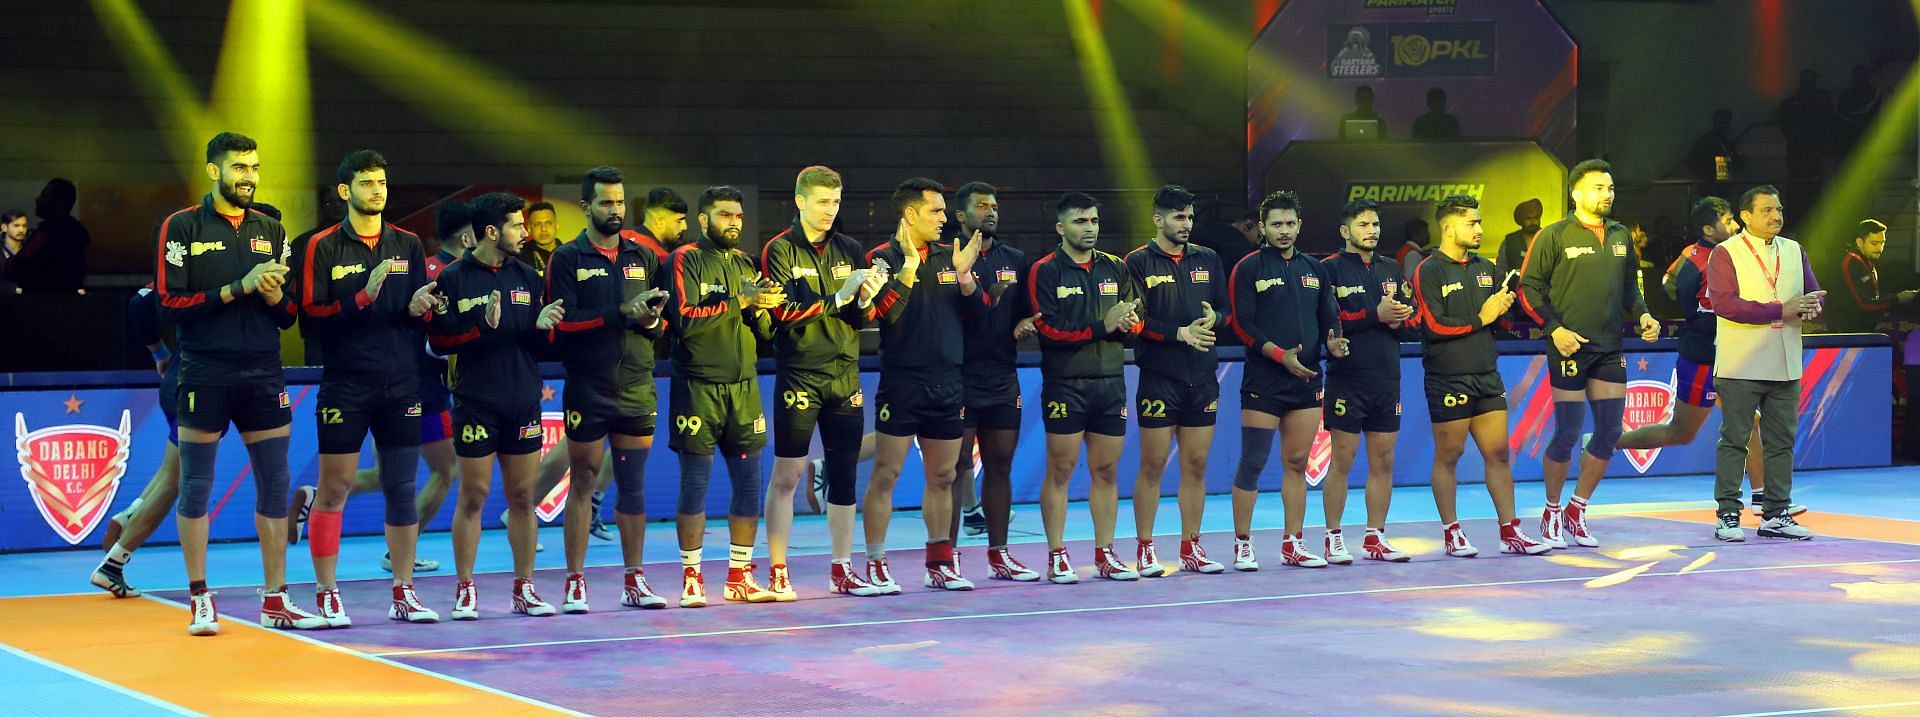 Can the Bengaluru Bulls end their campaign with a win? (Credit: PKL)